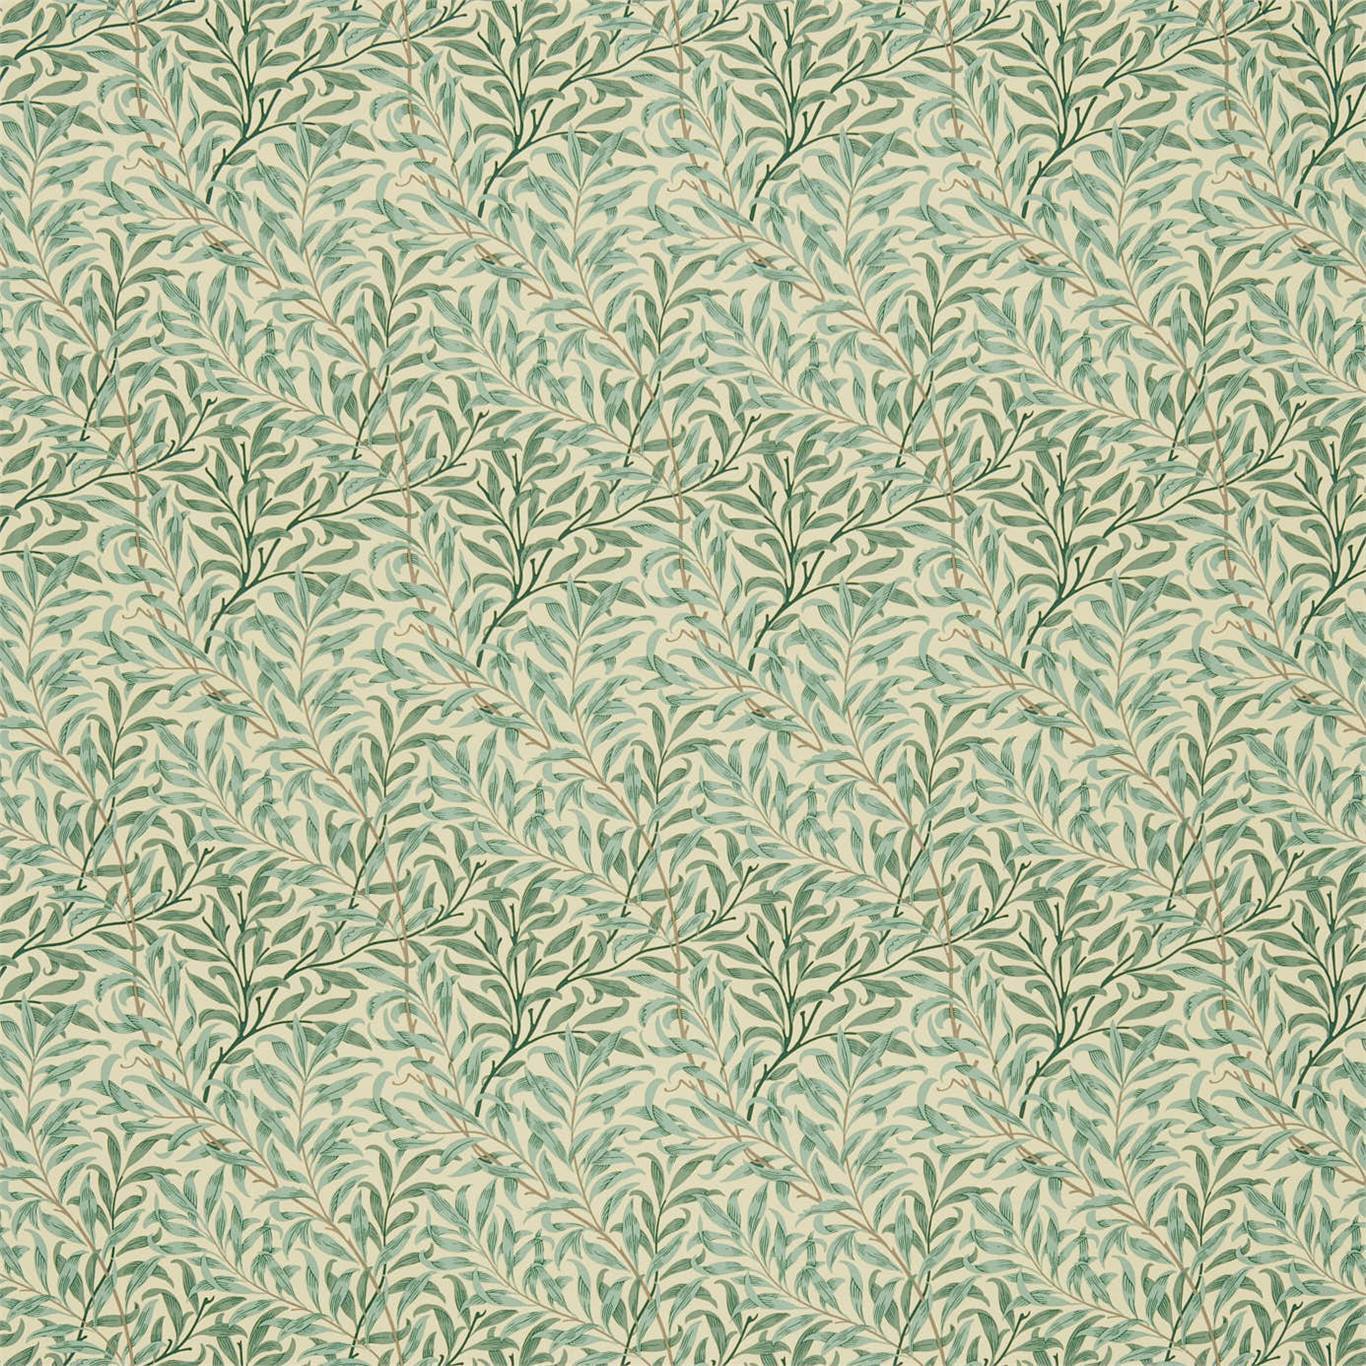 Willow Bough Cream/Pale Green Fabric By Morris & Co